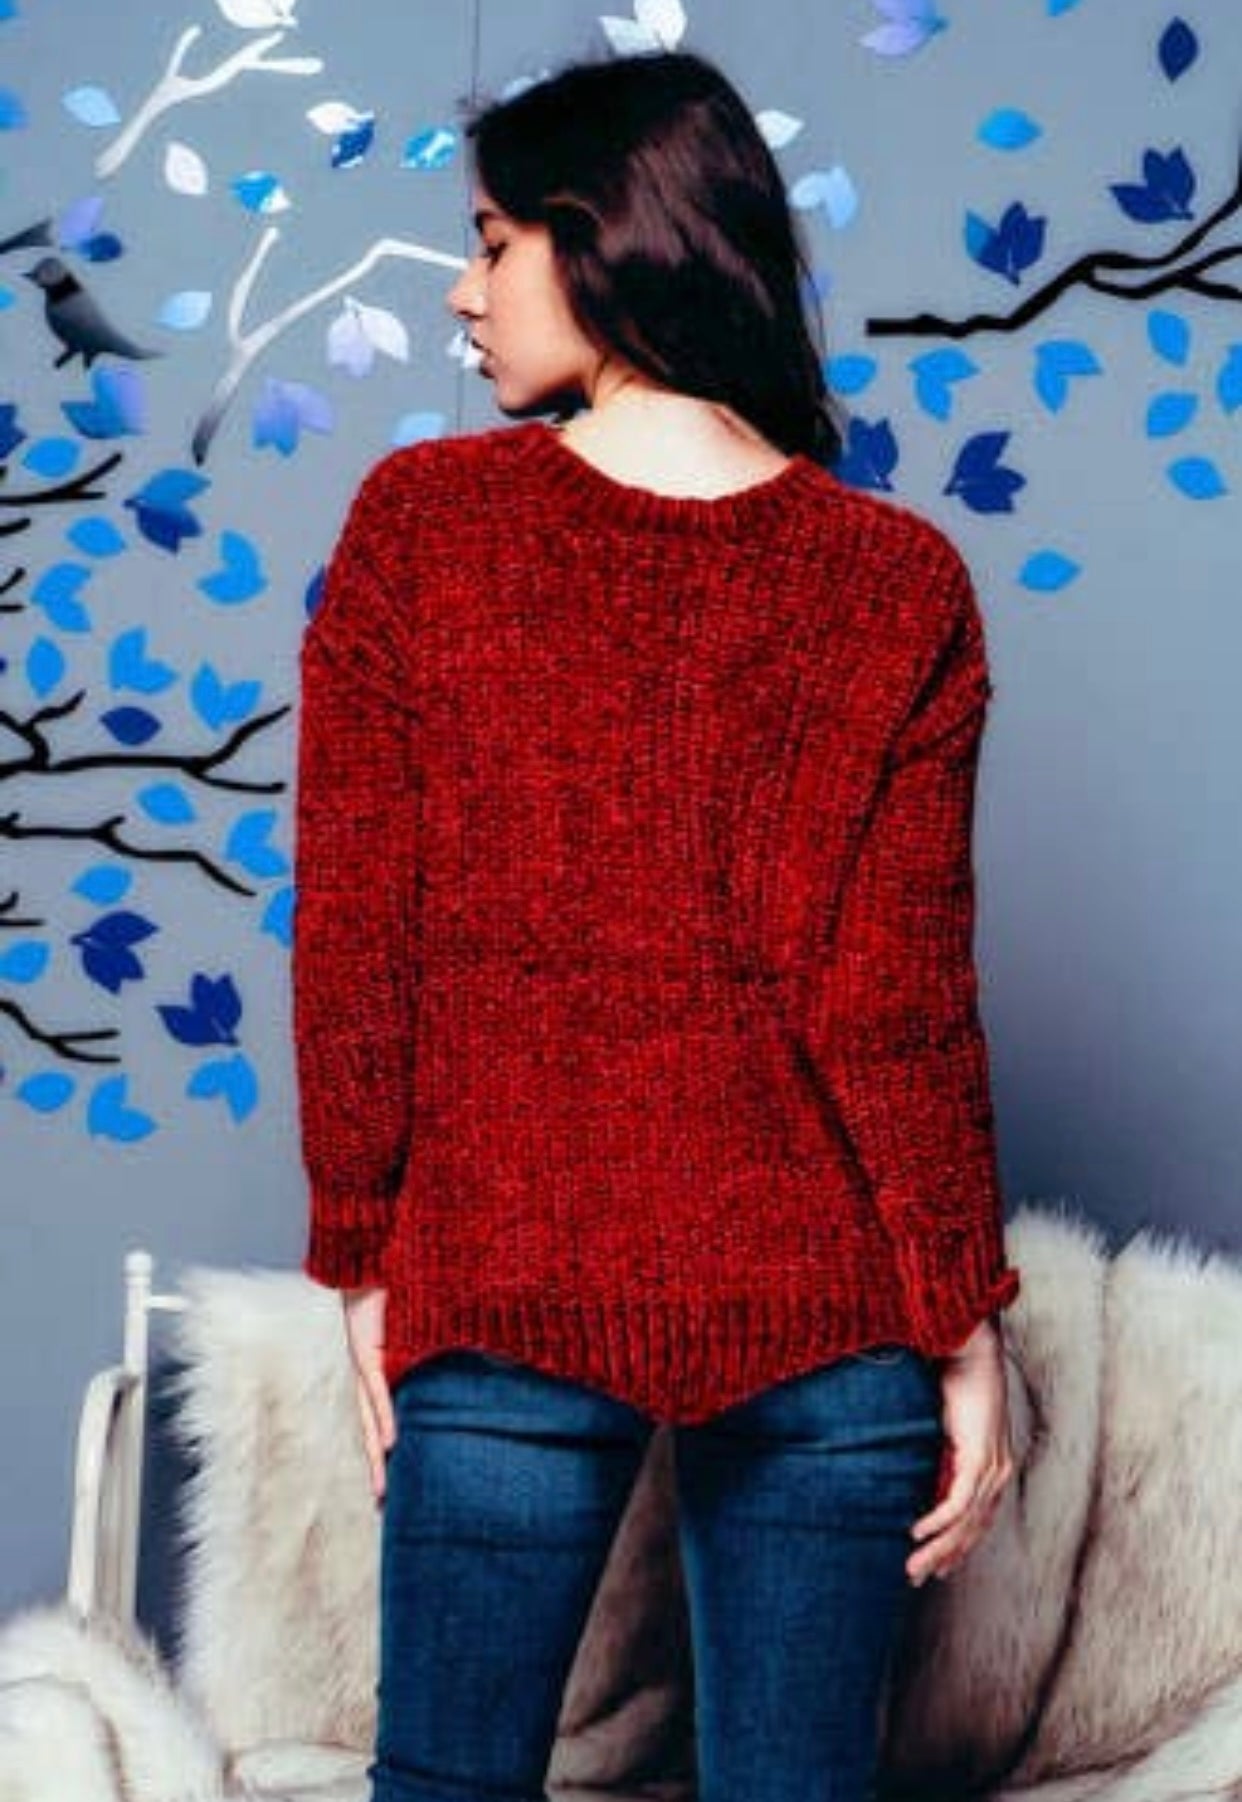 Chunky knit pullover made out of shiny chenille yarn knitting. Has a beautiful scalloped hem